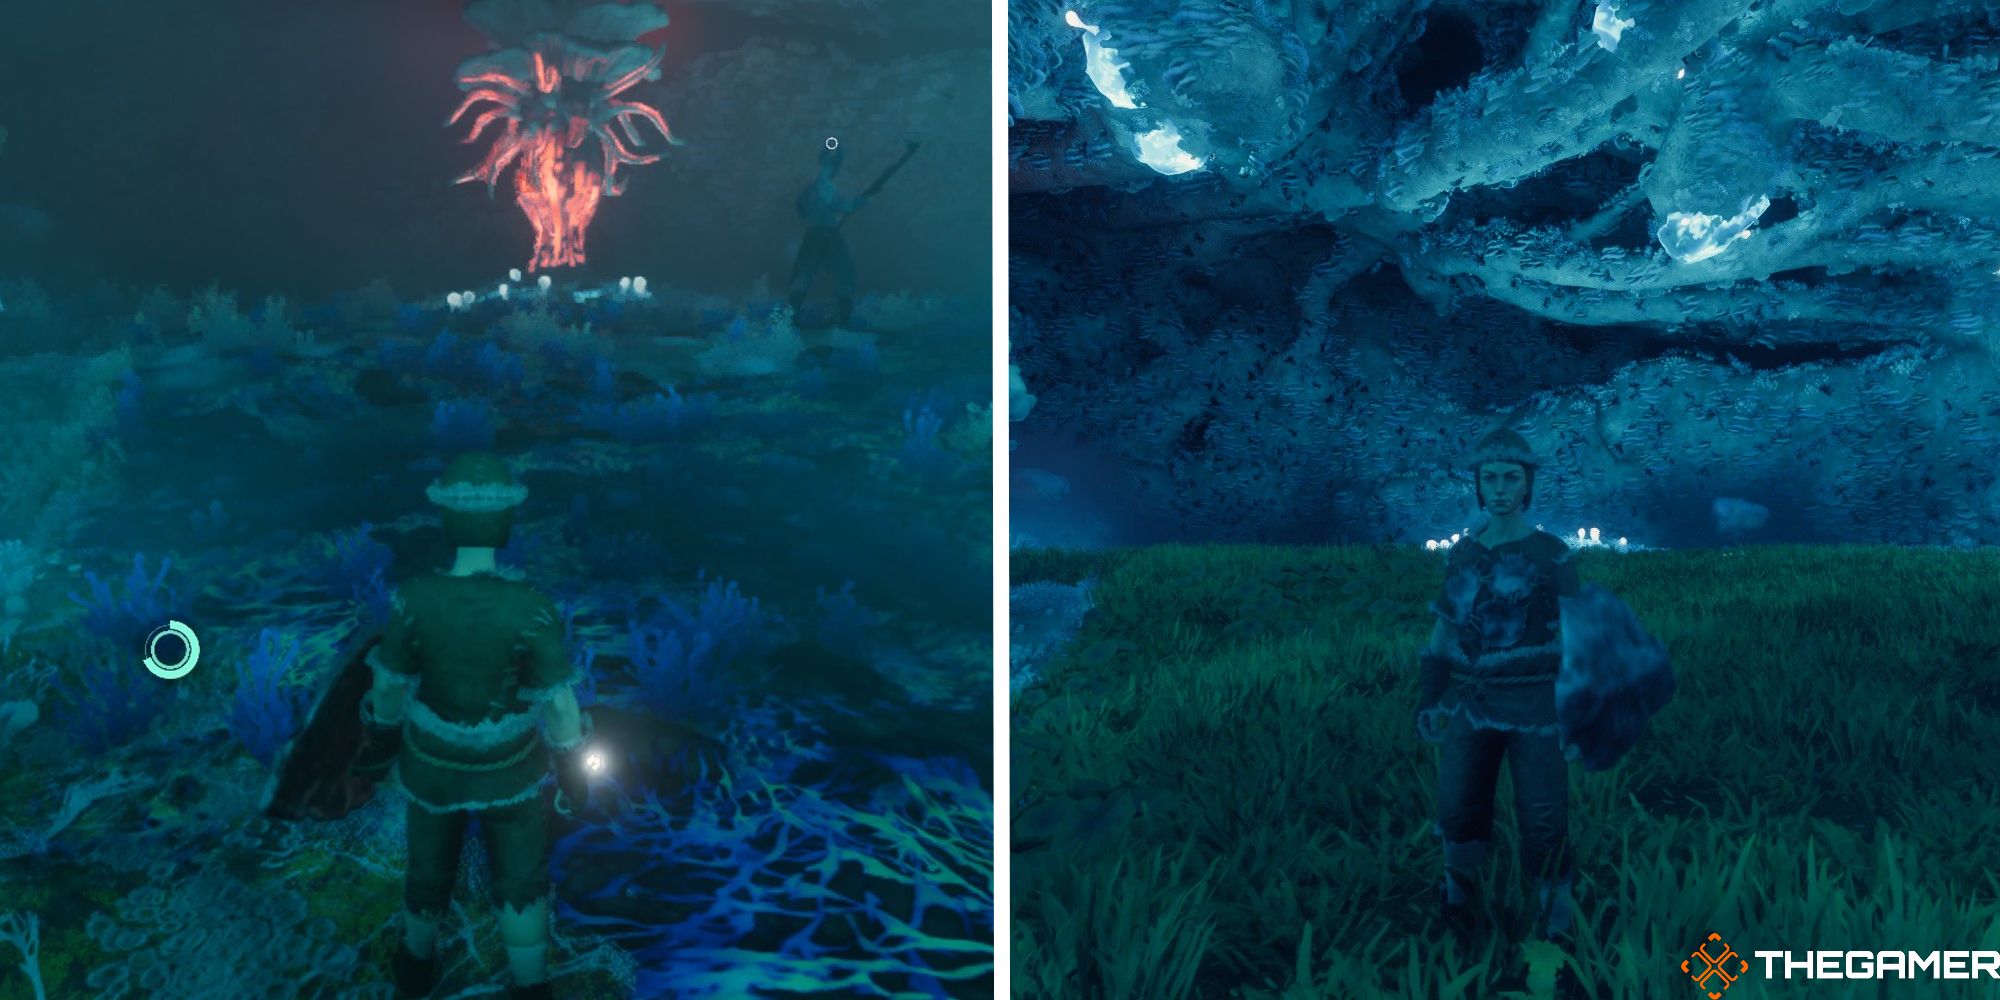 enshrouded split image showing shroud root next to image of area after player cleared root